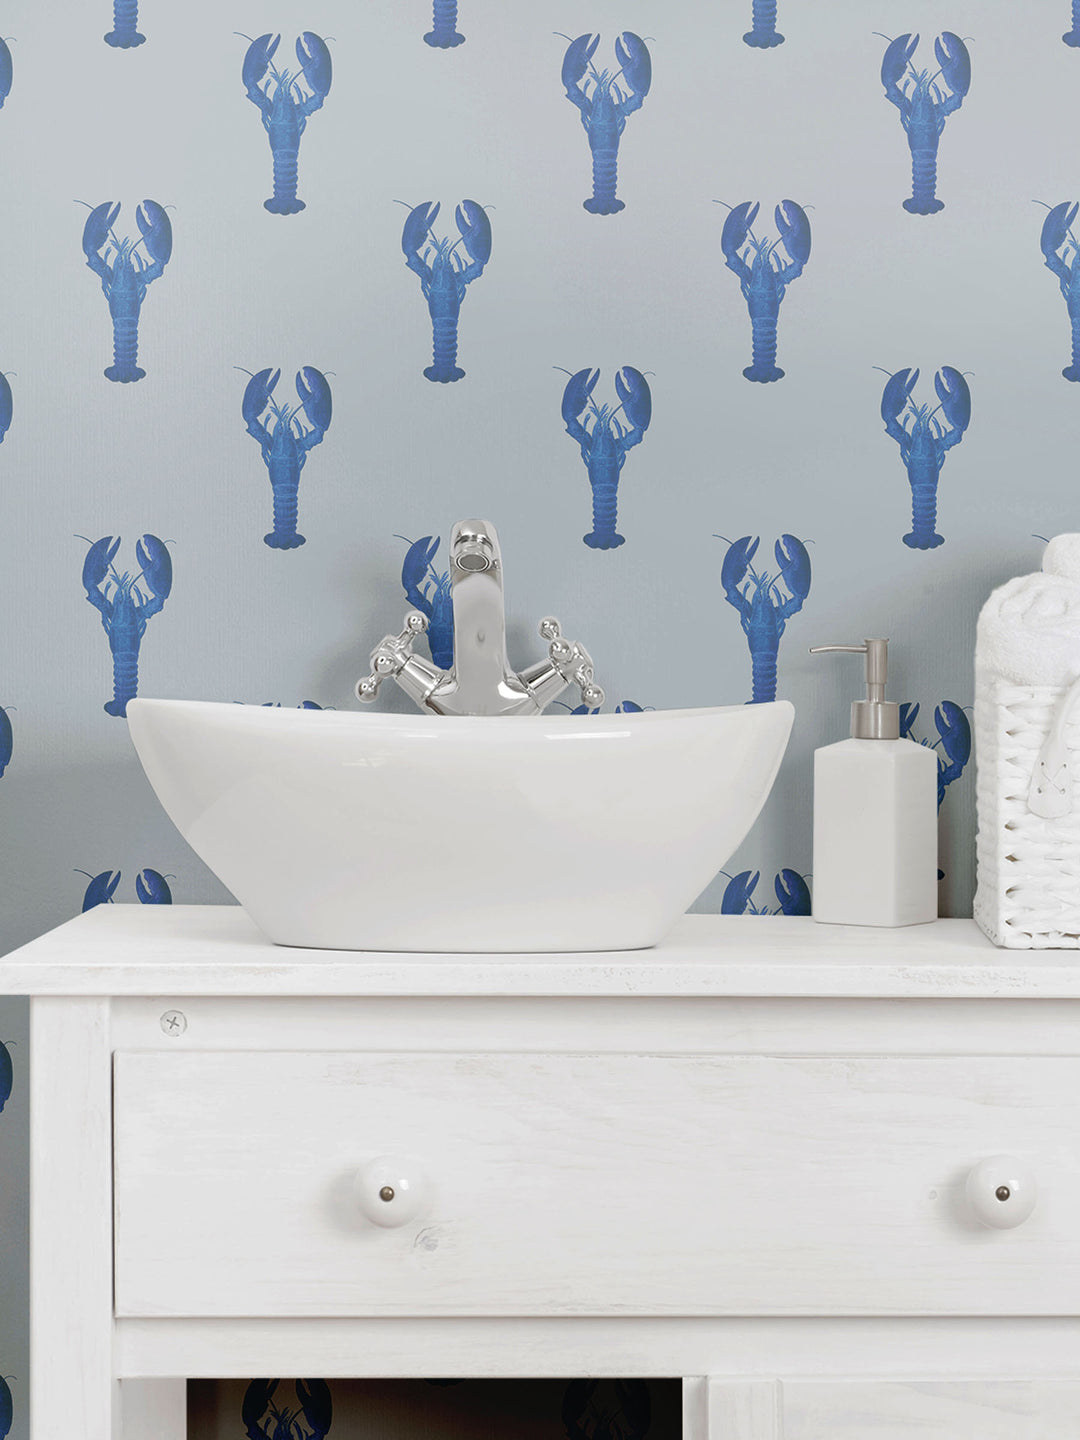 A bathroom decorated with blue grey lobster wallpaper by Milola Design